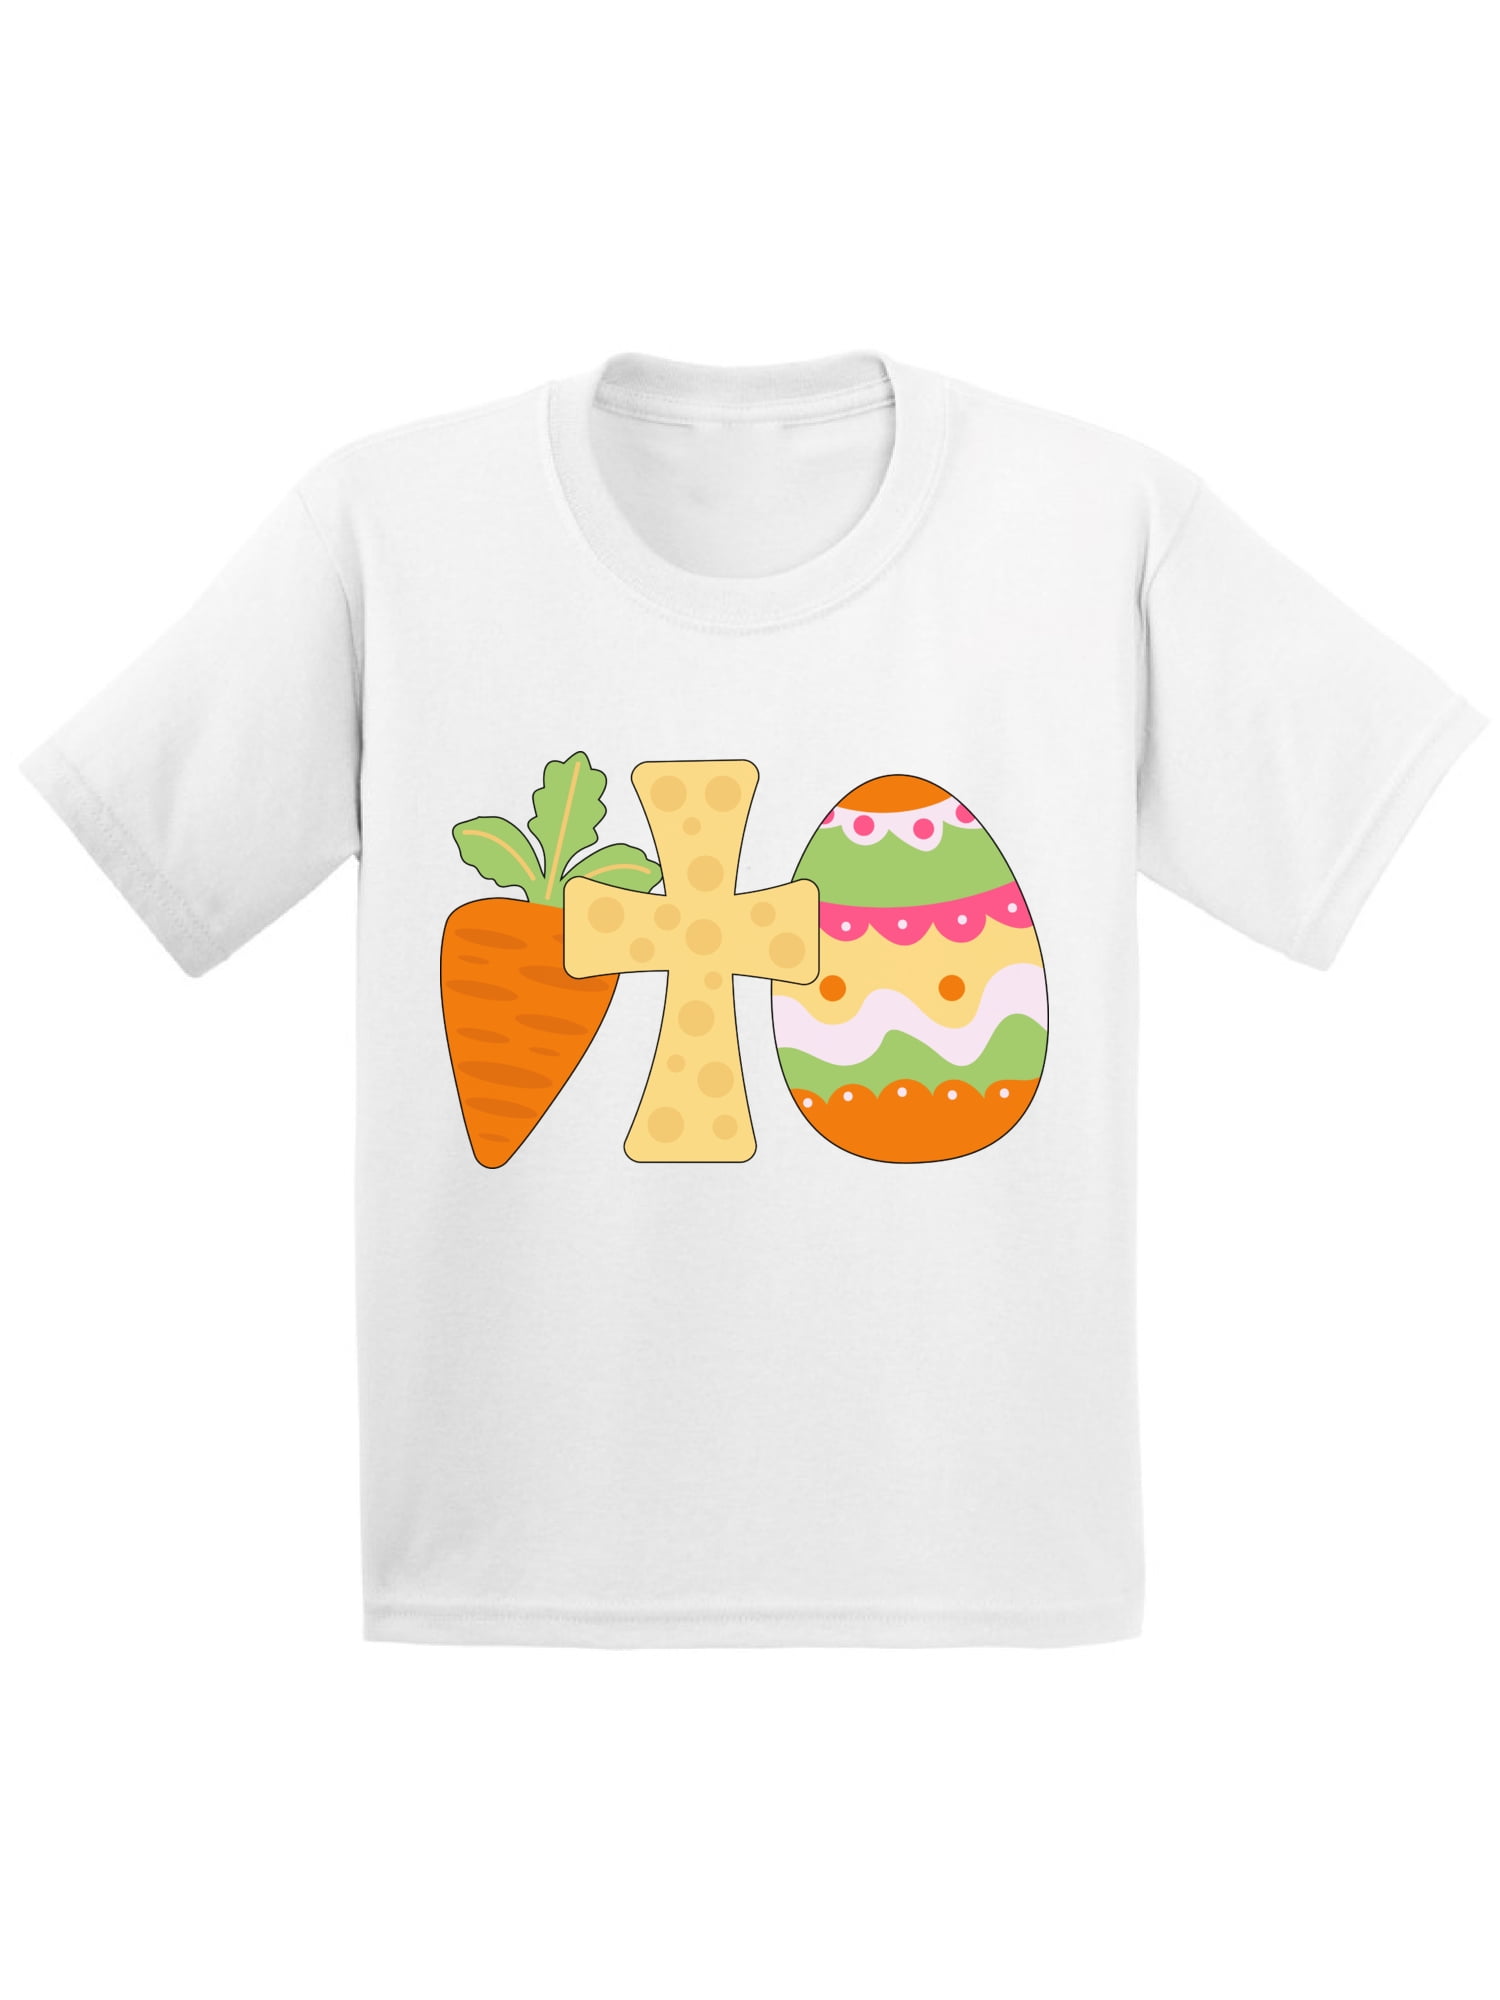 Christian Gifts for Kids First Easter T-Shirts for 12 - 18 Month Baby Girls  Baby Boy Easter Clothes 6M 24M 12M 